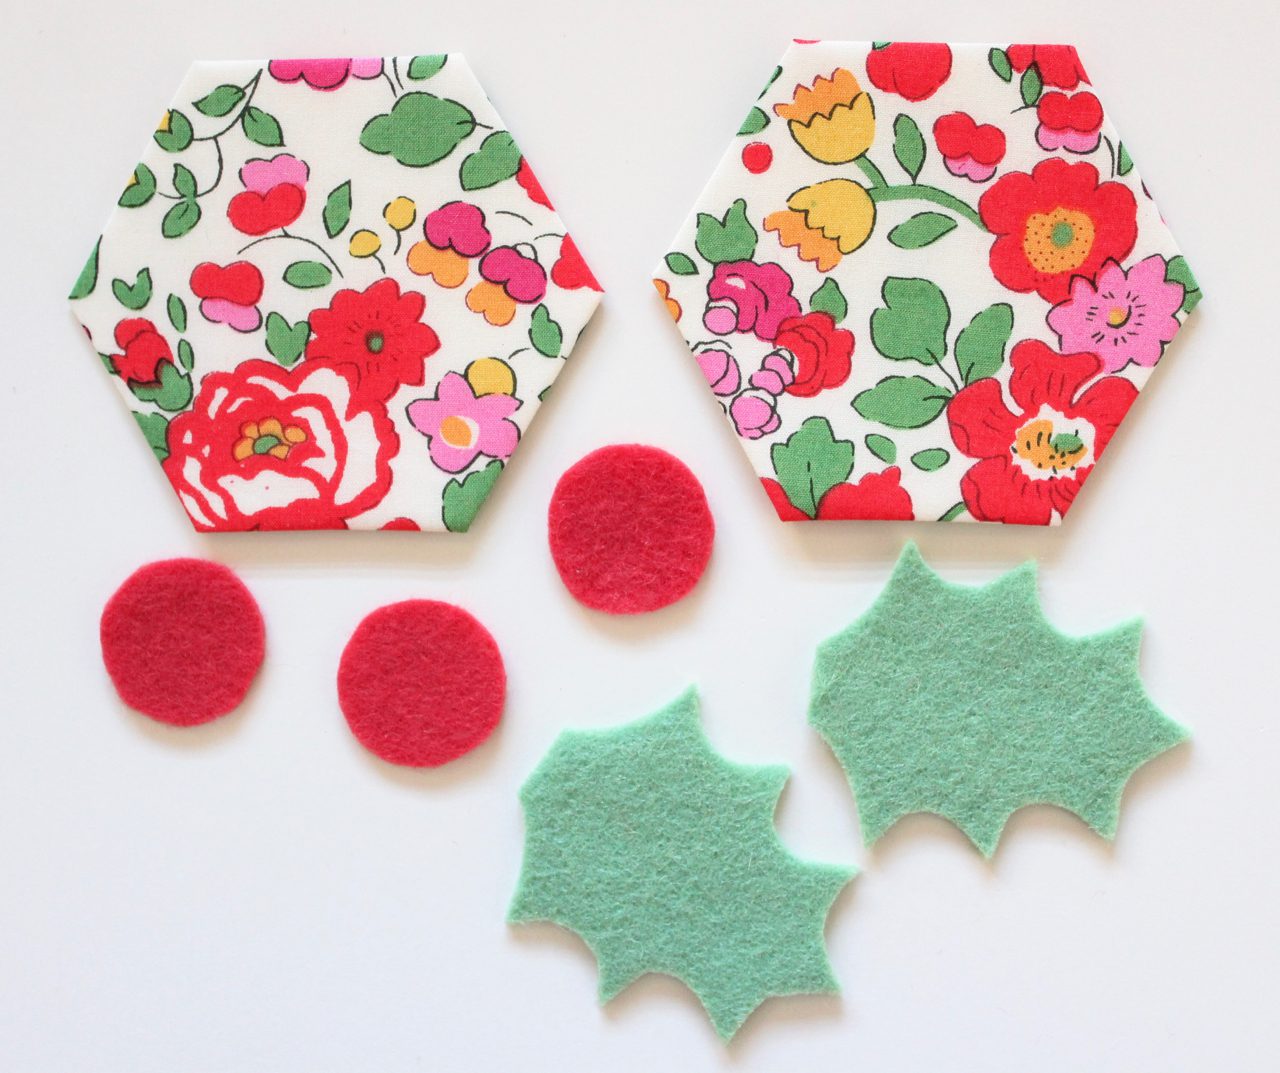 How To Sew Hexies - An English Paper Piecing Tutorial - Molly and Mama